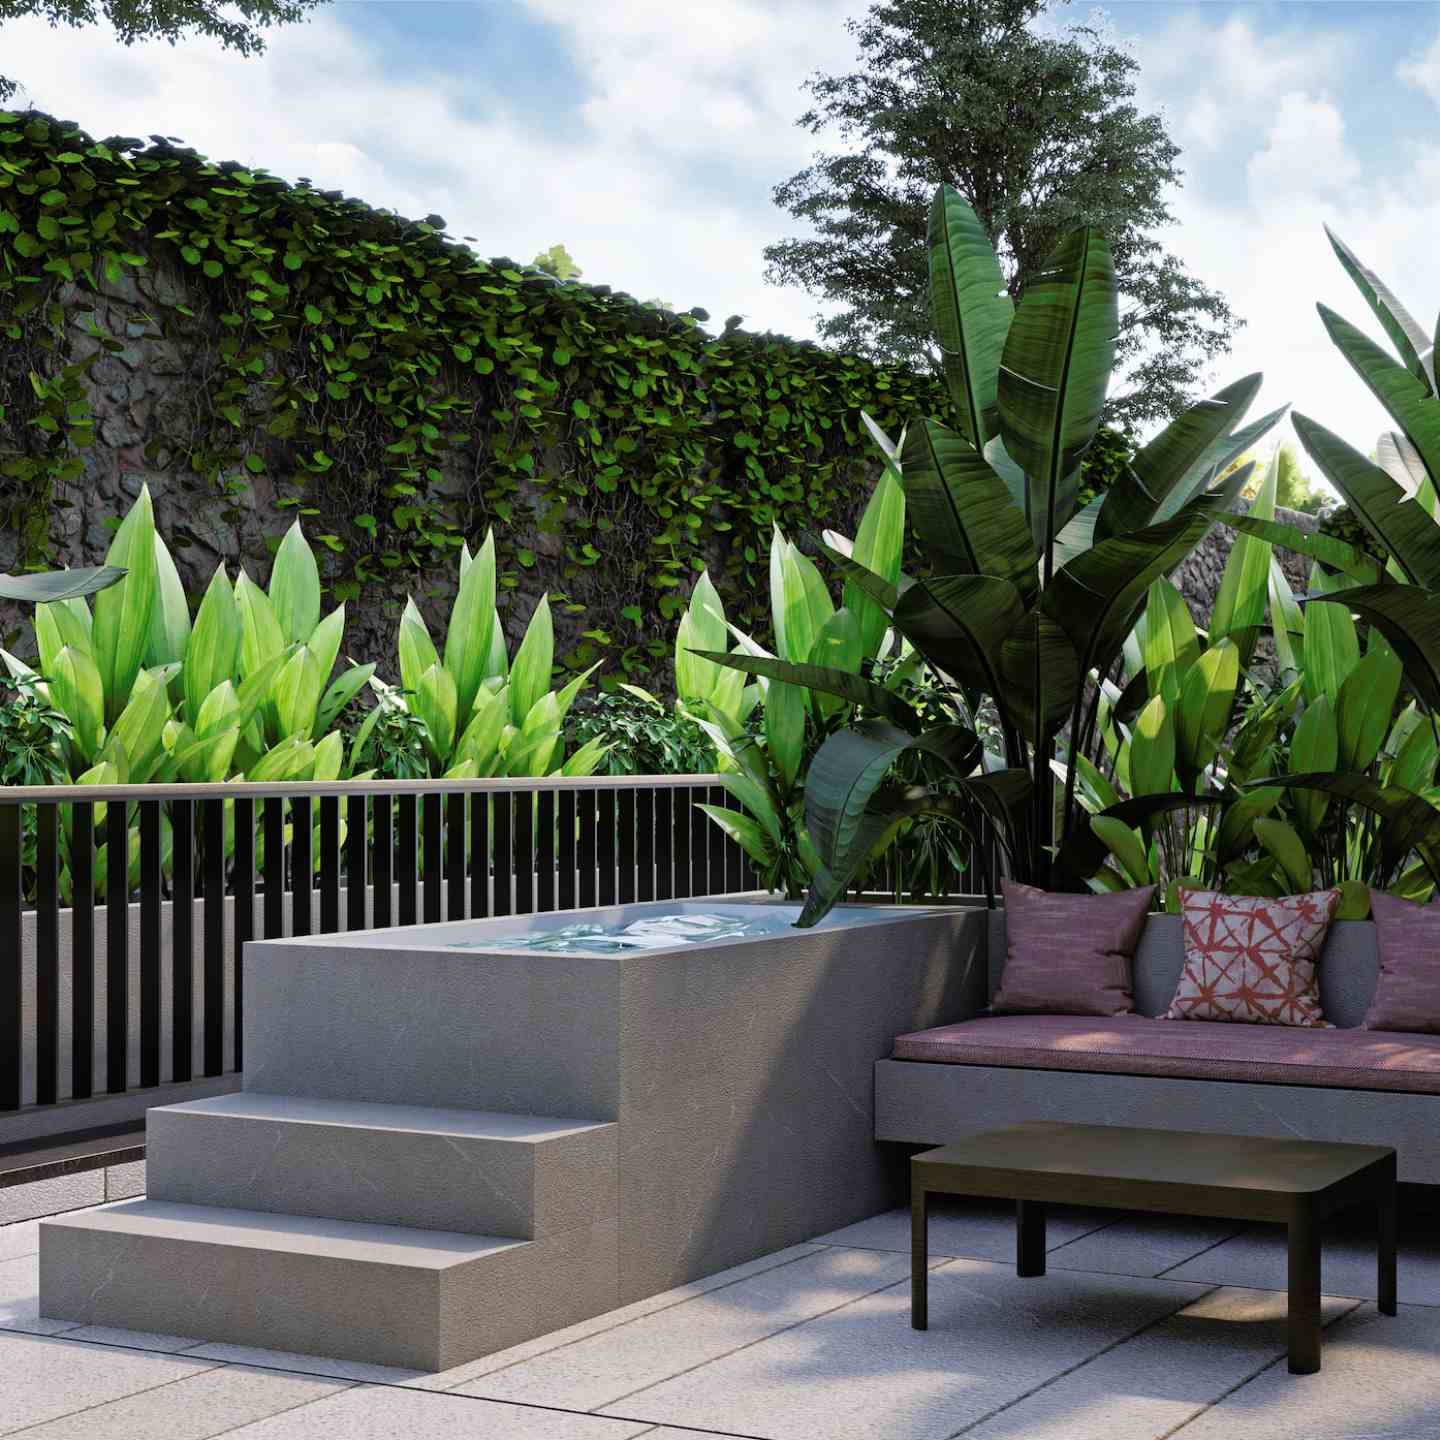 Stone jacuzzi with large green plants in the background and a red cushioned outdoor sofa